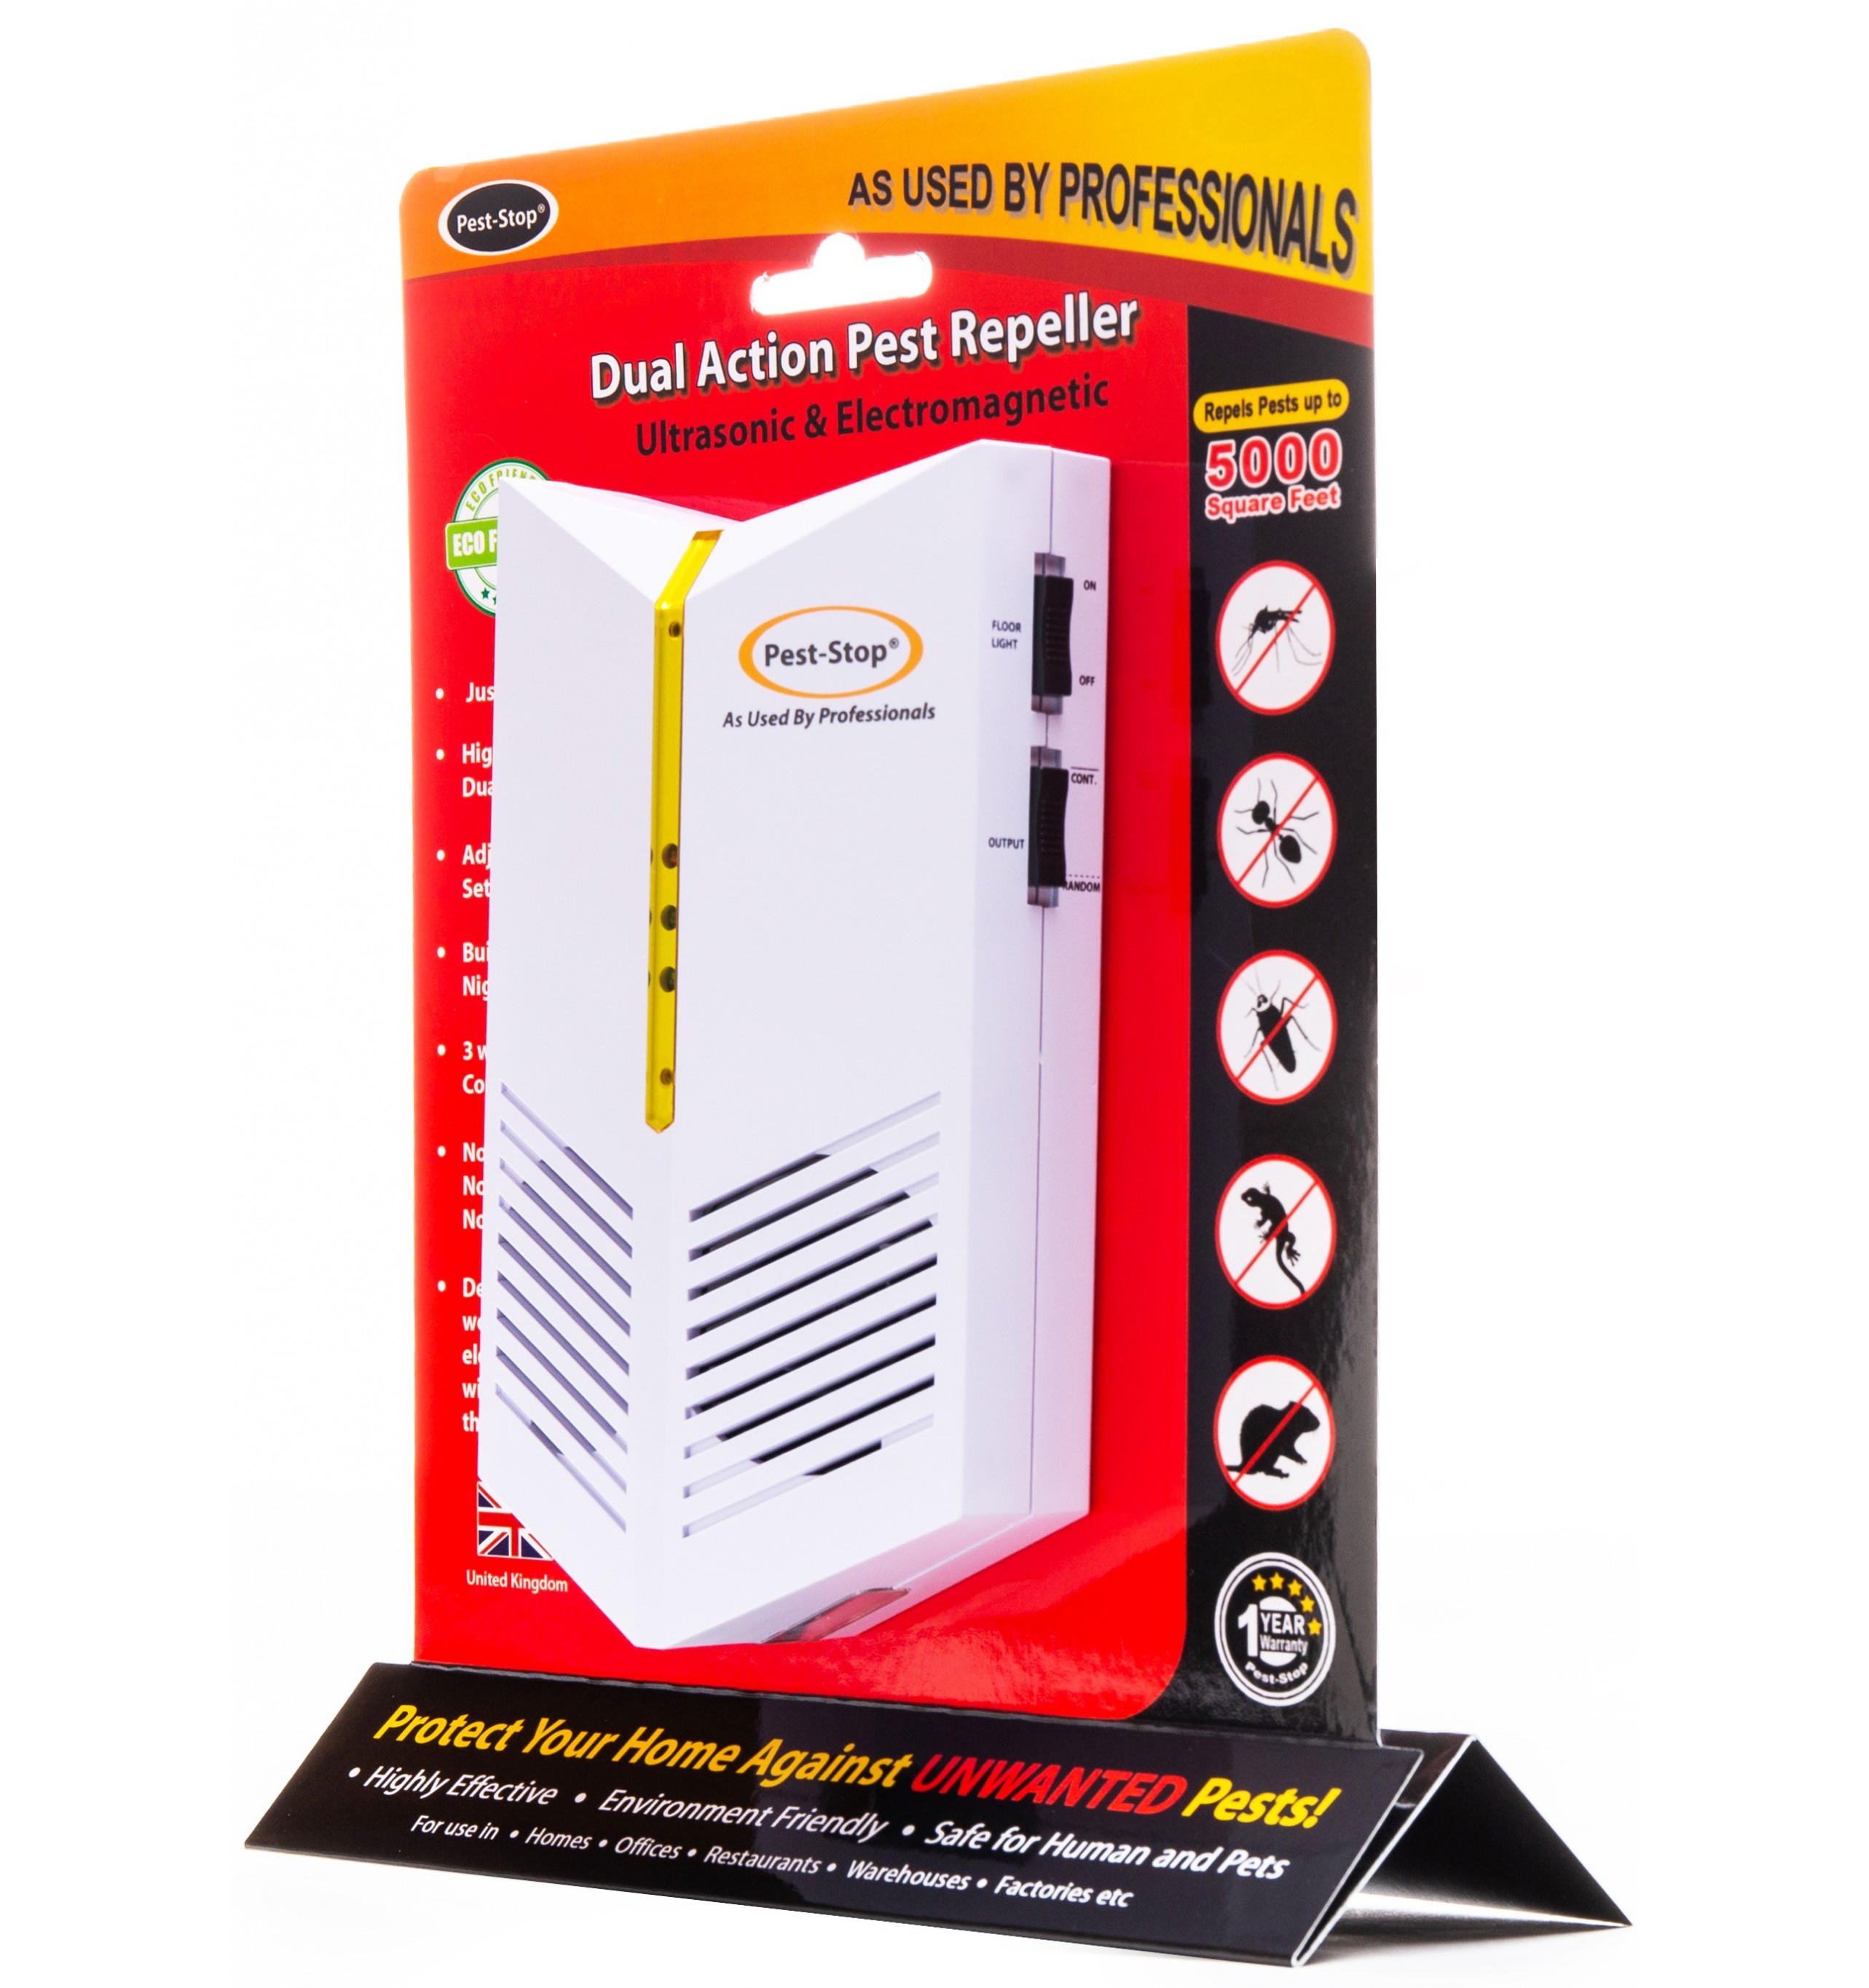 Dual Action Pest Repeller